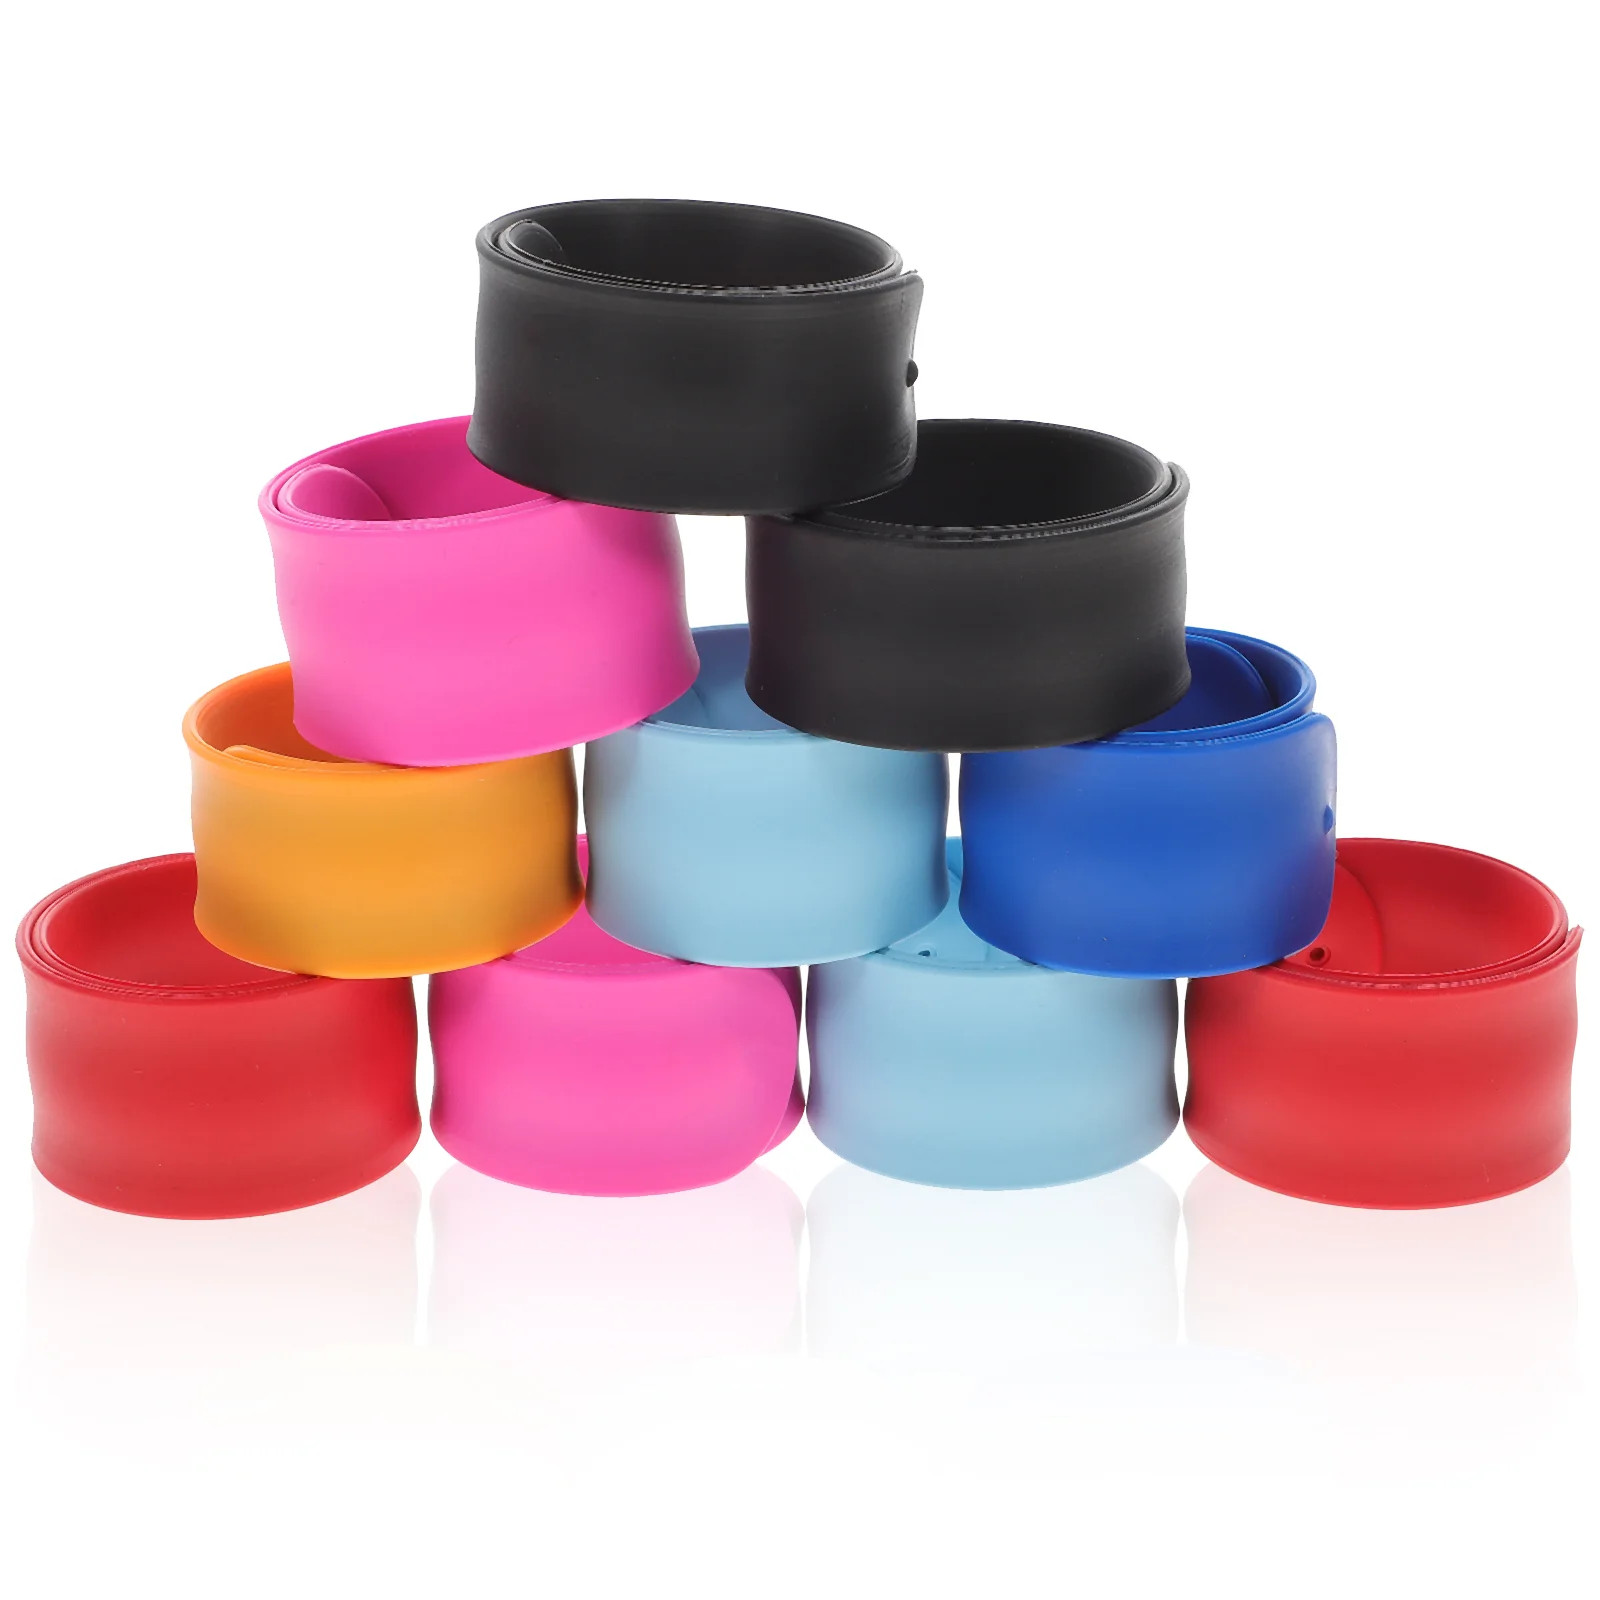 

10 Pcs Papa Circle Silicone Bracelets Wrist Jewelries Party Favors Adorable Hand Rings Energy Silica Gel Slap Bands Kids Child